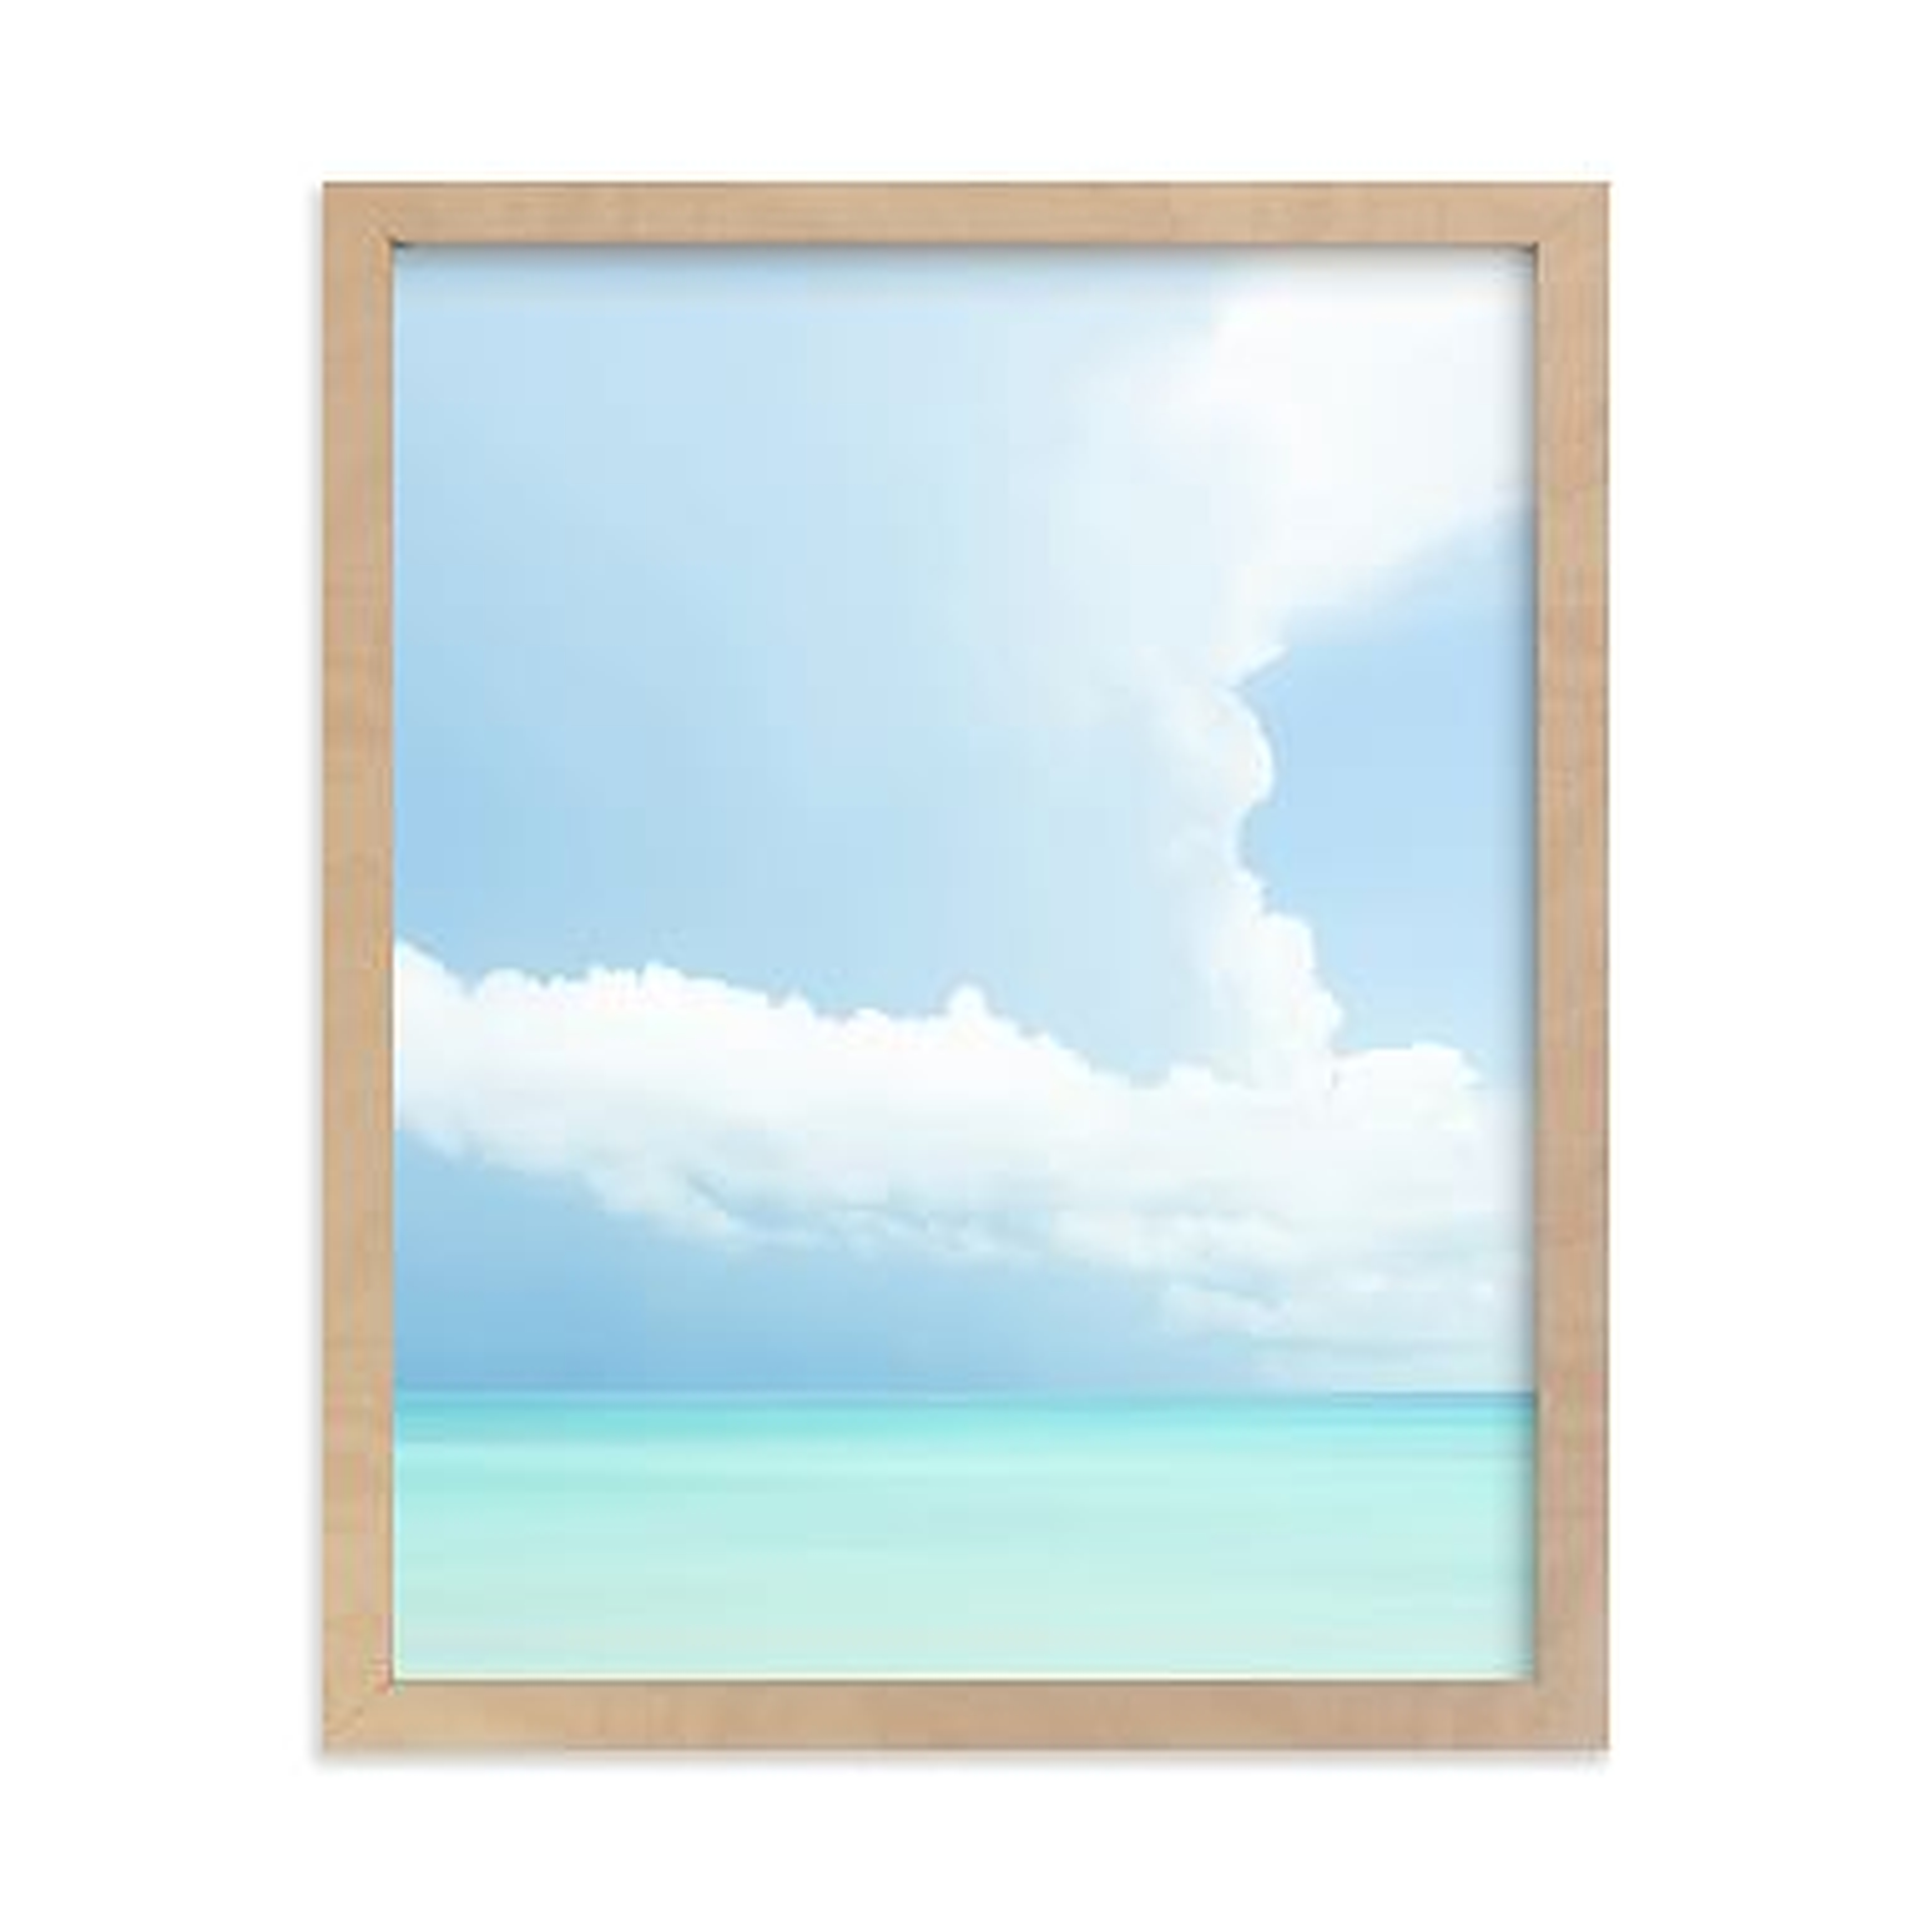 Summer Clouds Series 2 Framed Art by Minted(R),Natural, 8x10 - Pottery Barn Teen